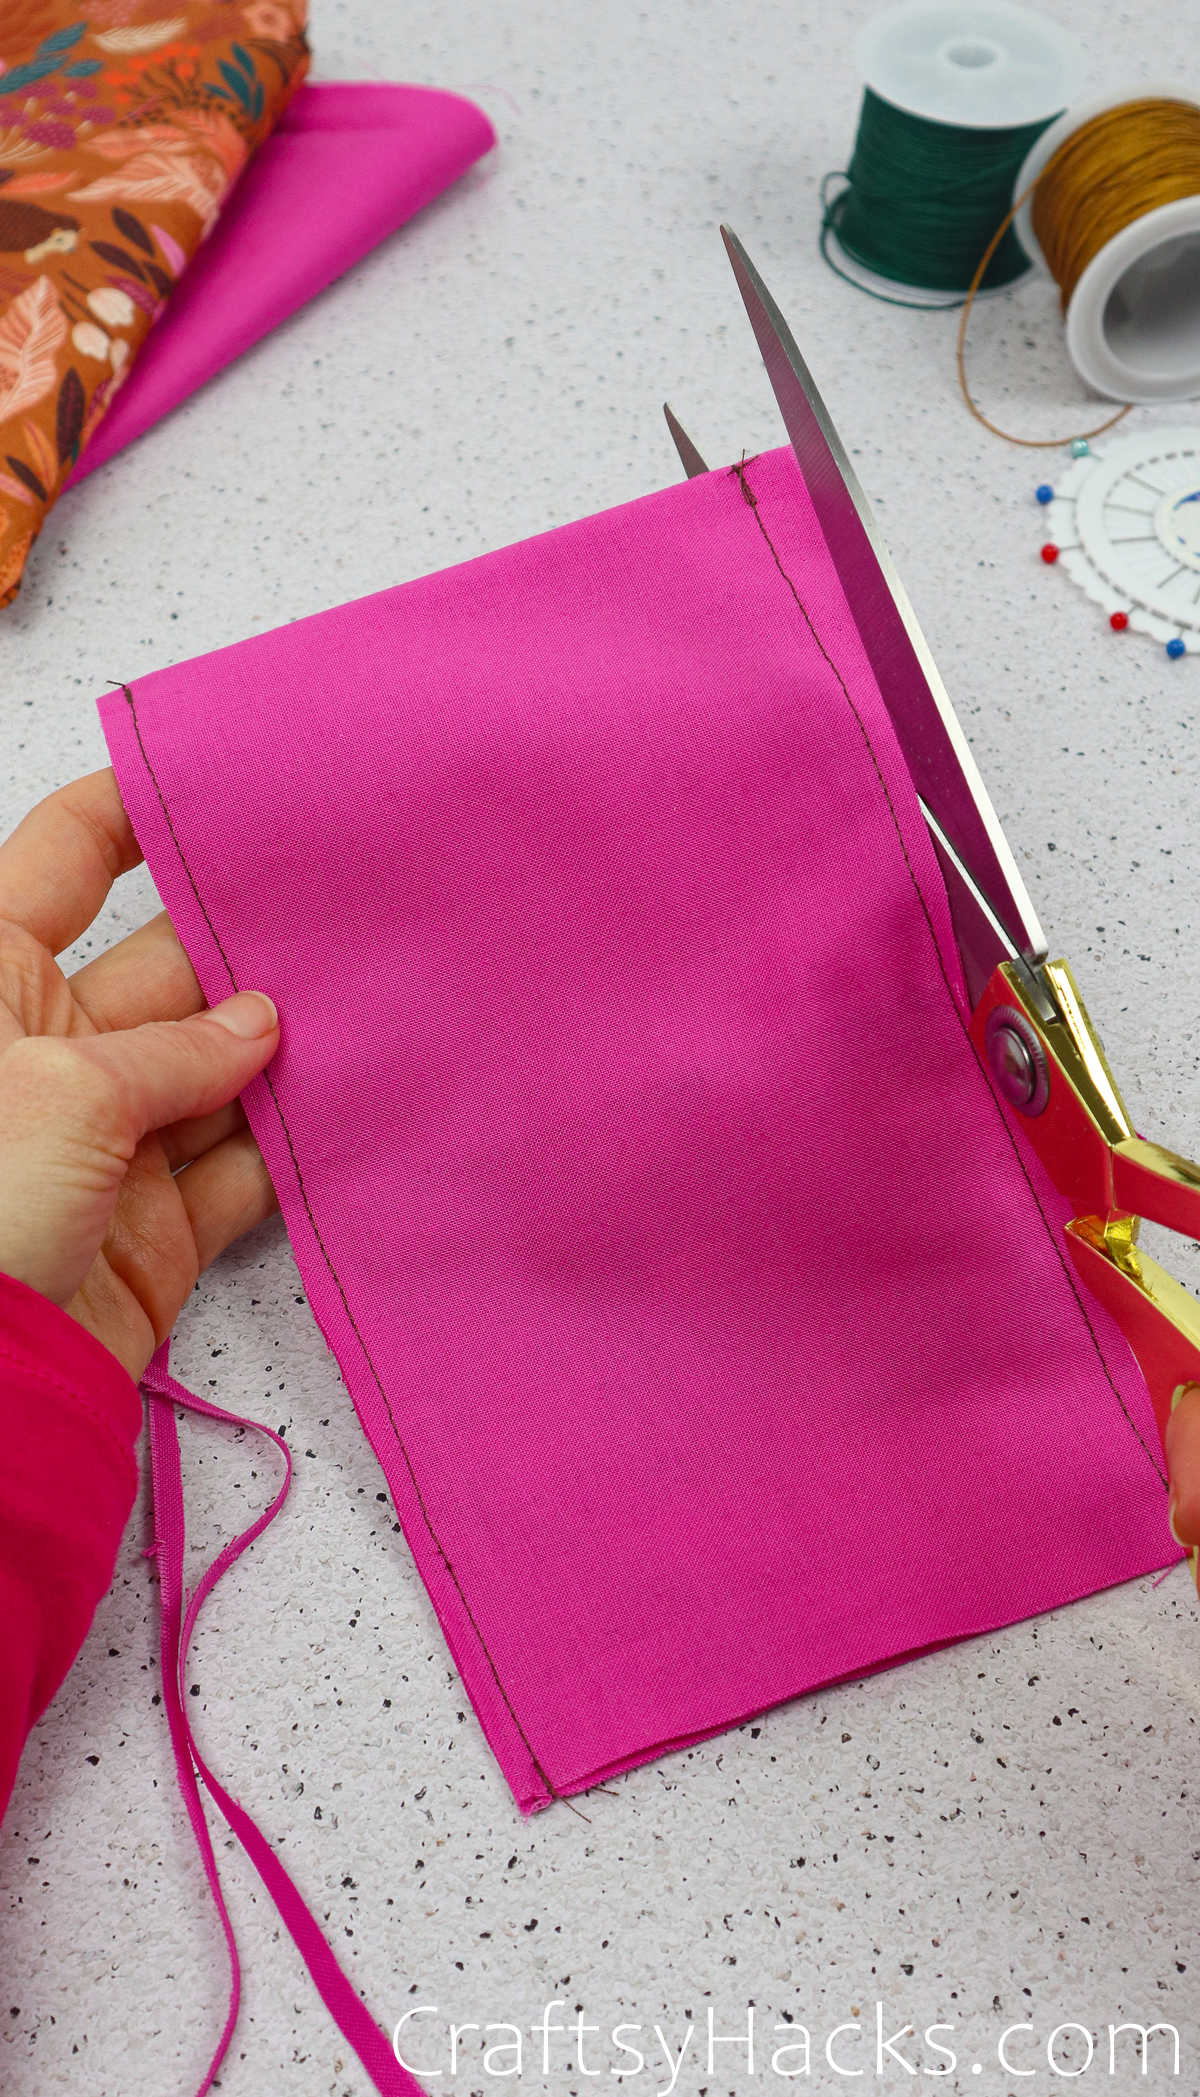 cutting excess fabric